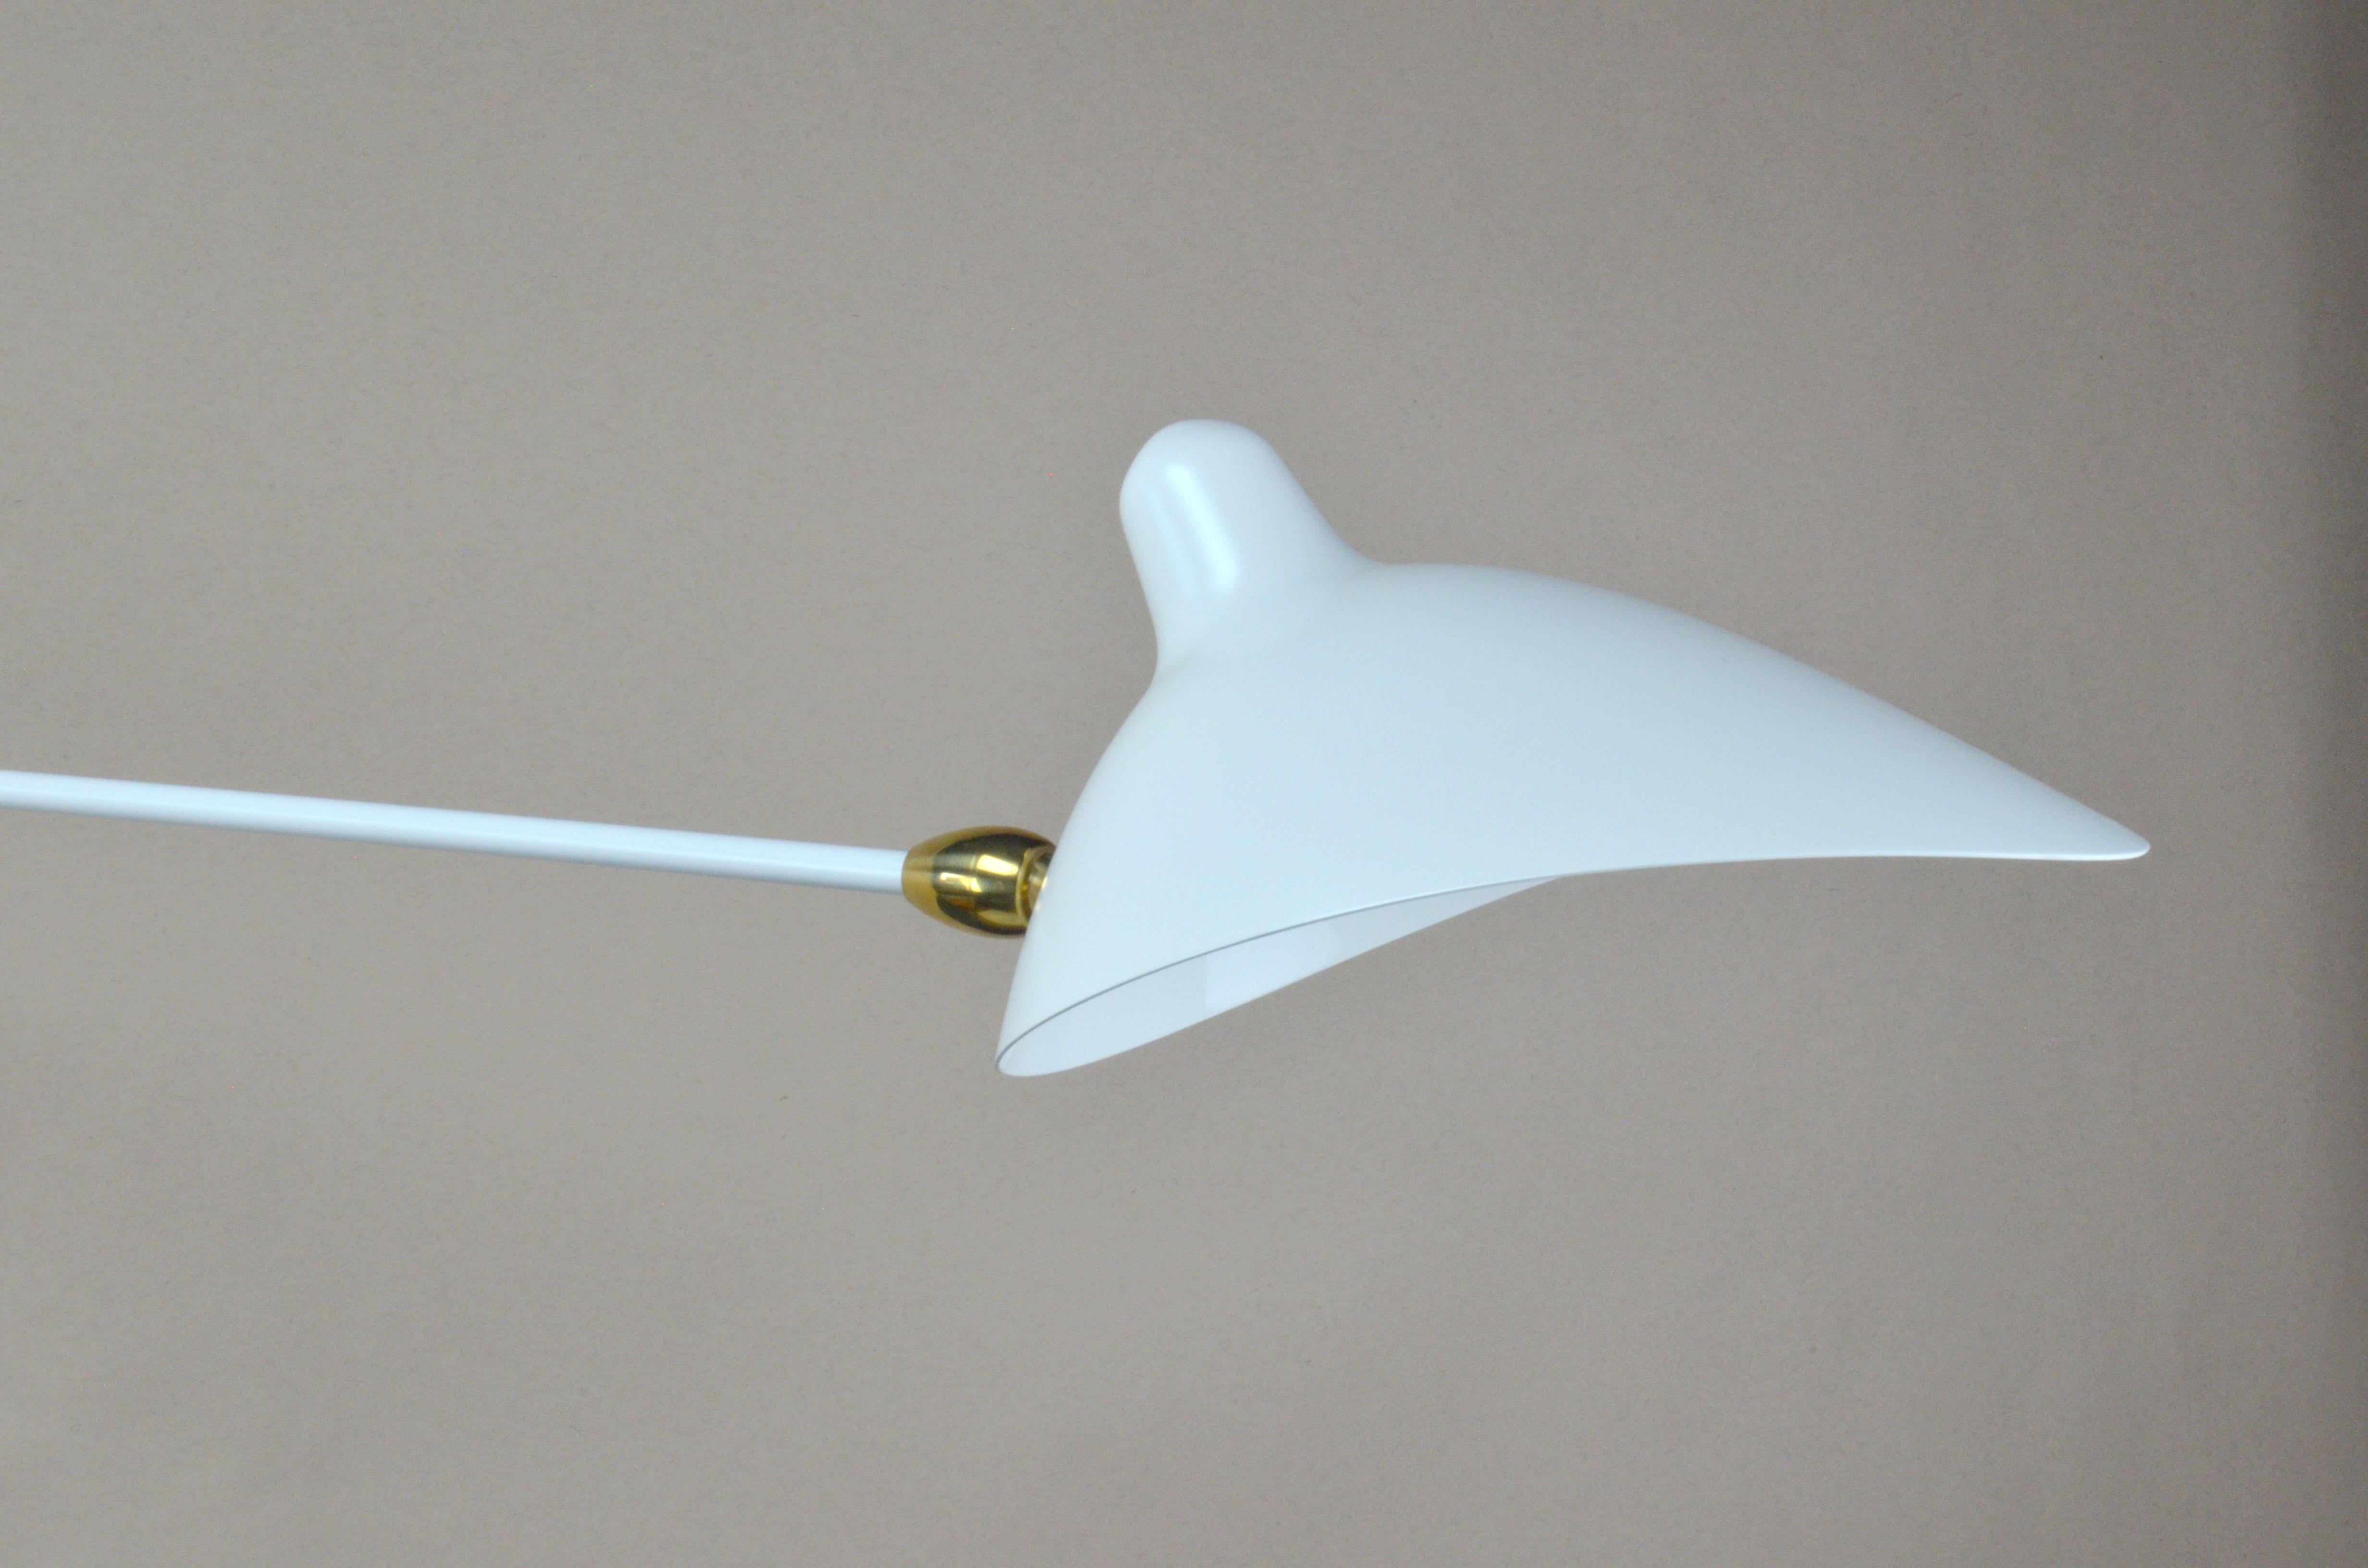 French Serge Mouille - Rotating Sconce with 1 Curved Arm in White - IN STOCK! For Sale